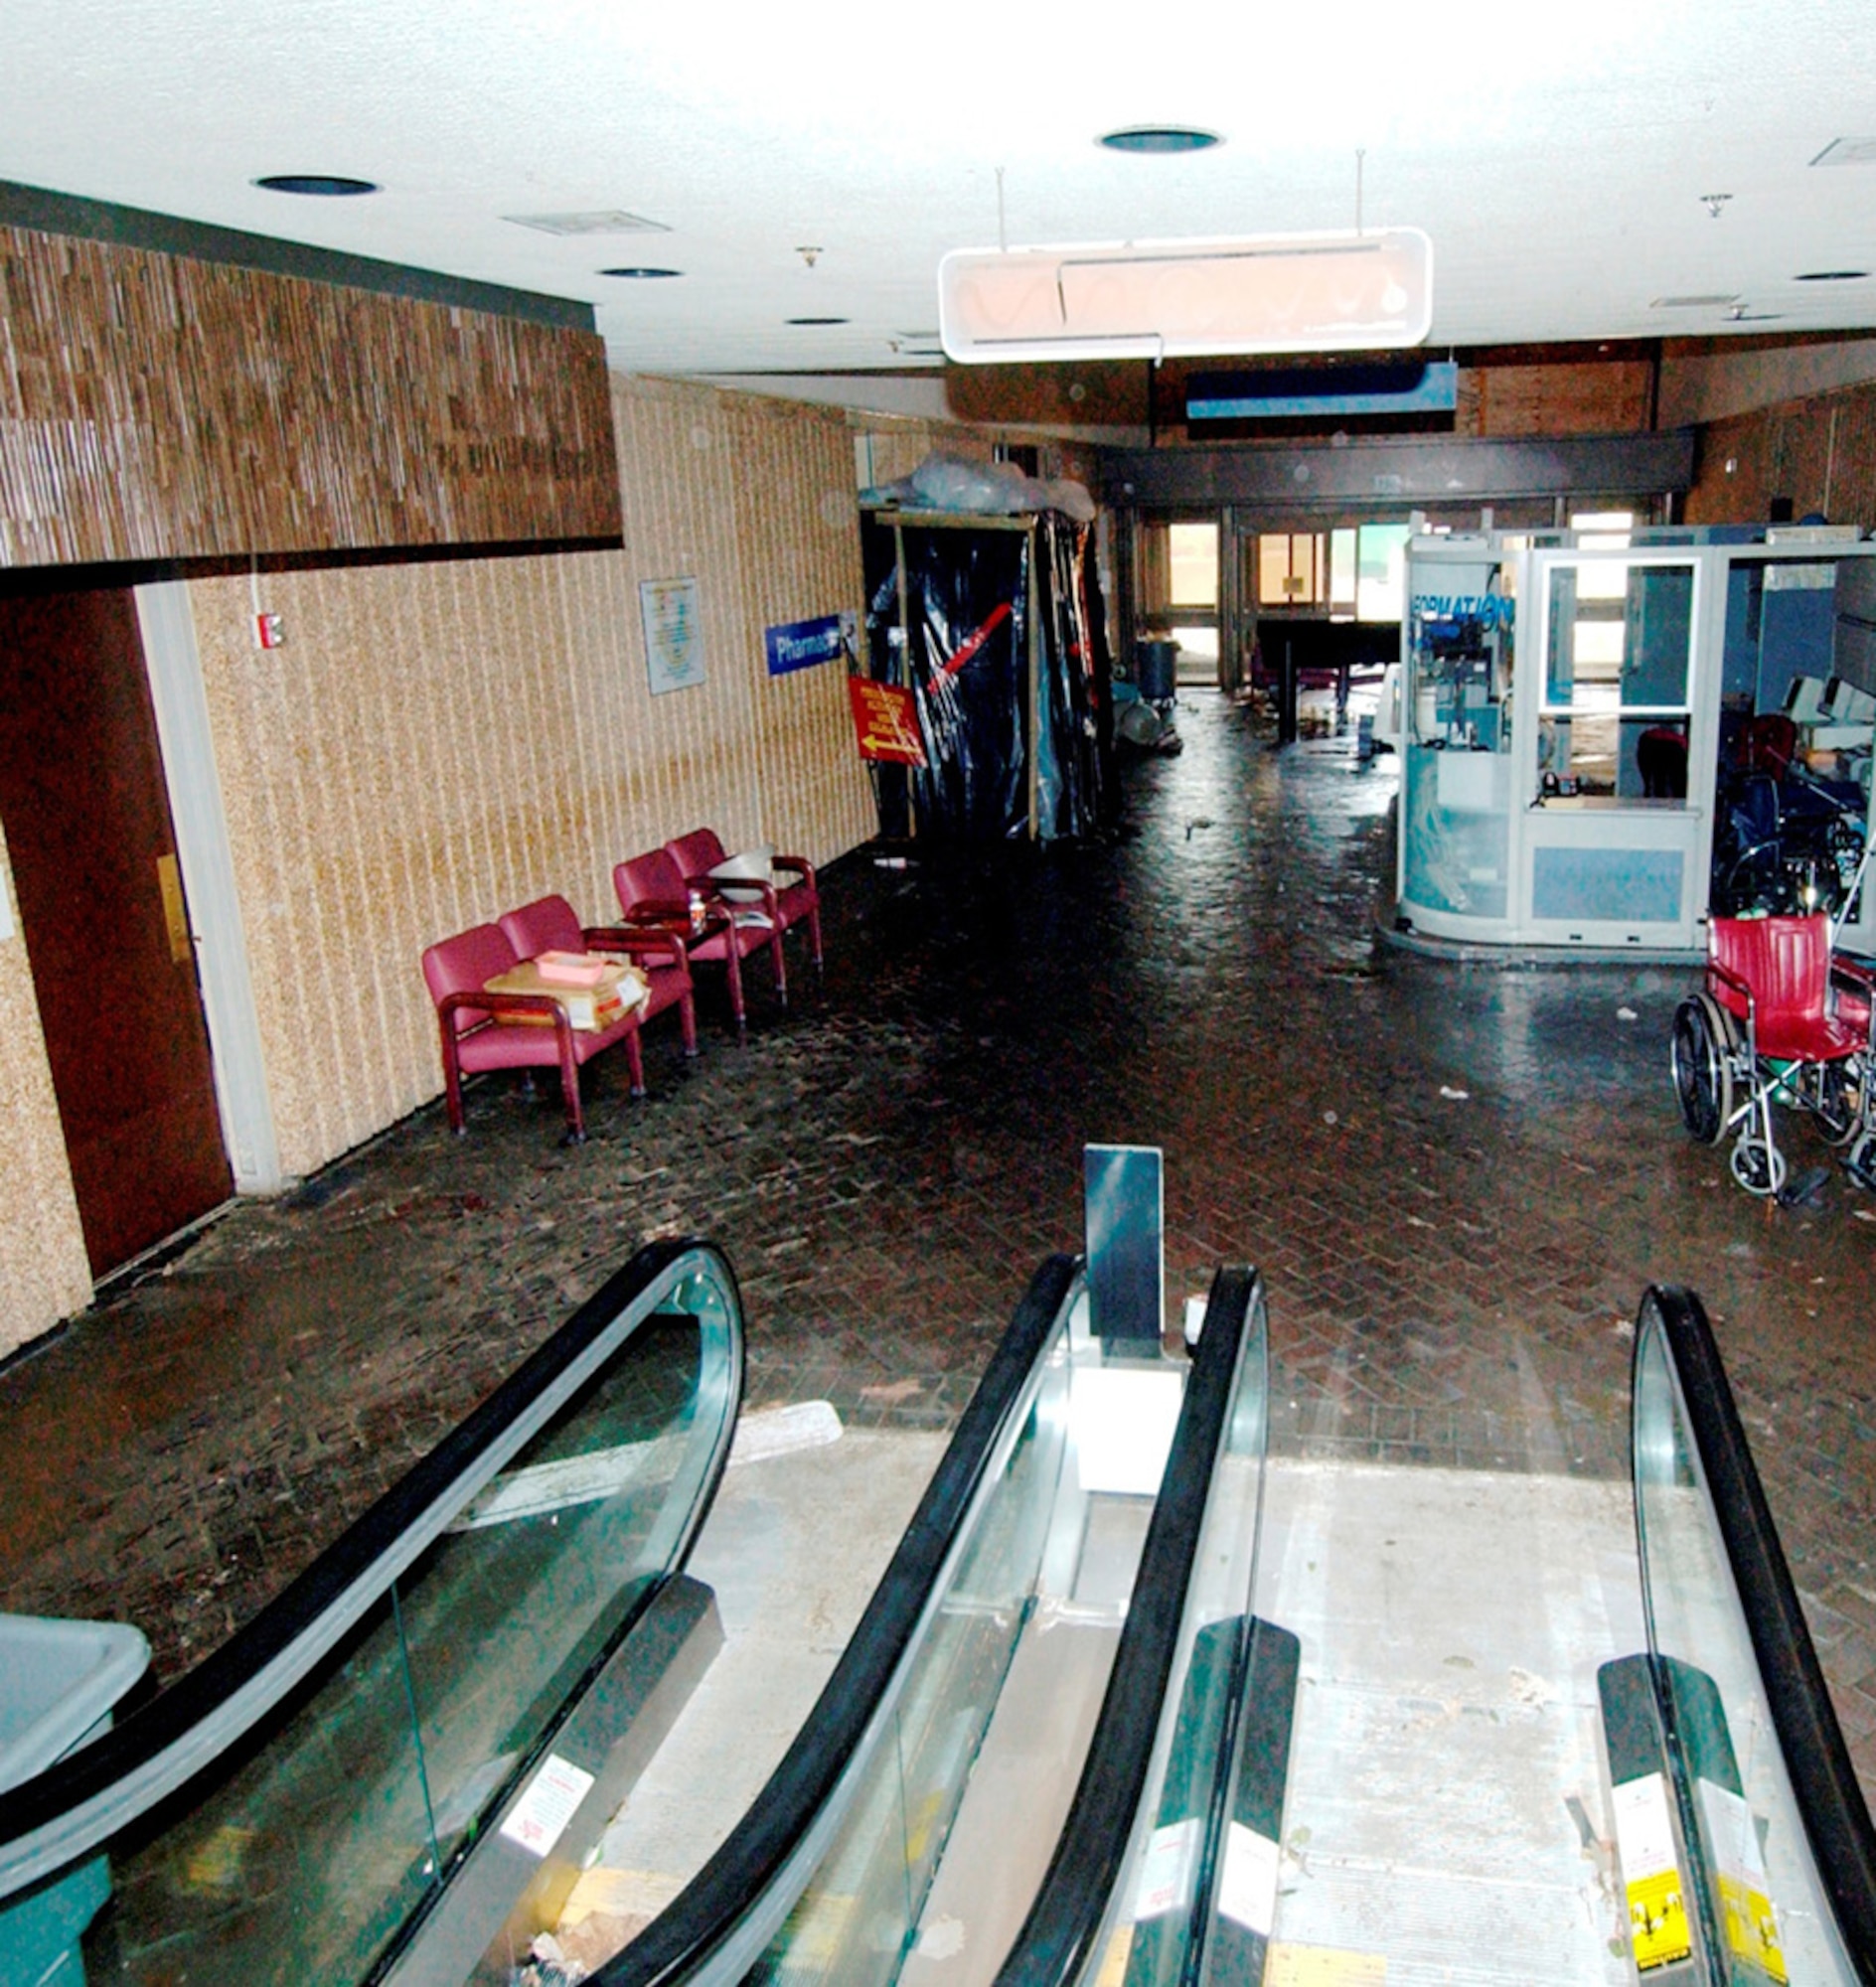 The outpatient clinic entrance lobby at Keesler Medical Center shows evidence of Katrina’s storm surge shortly after the hurricane struck — a water line is visible over the red chairs on the left.  (U.S. Air Force photo)